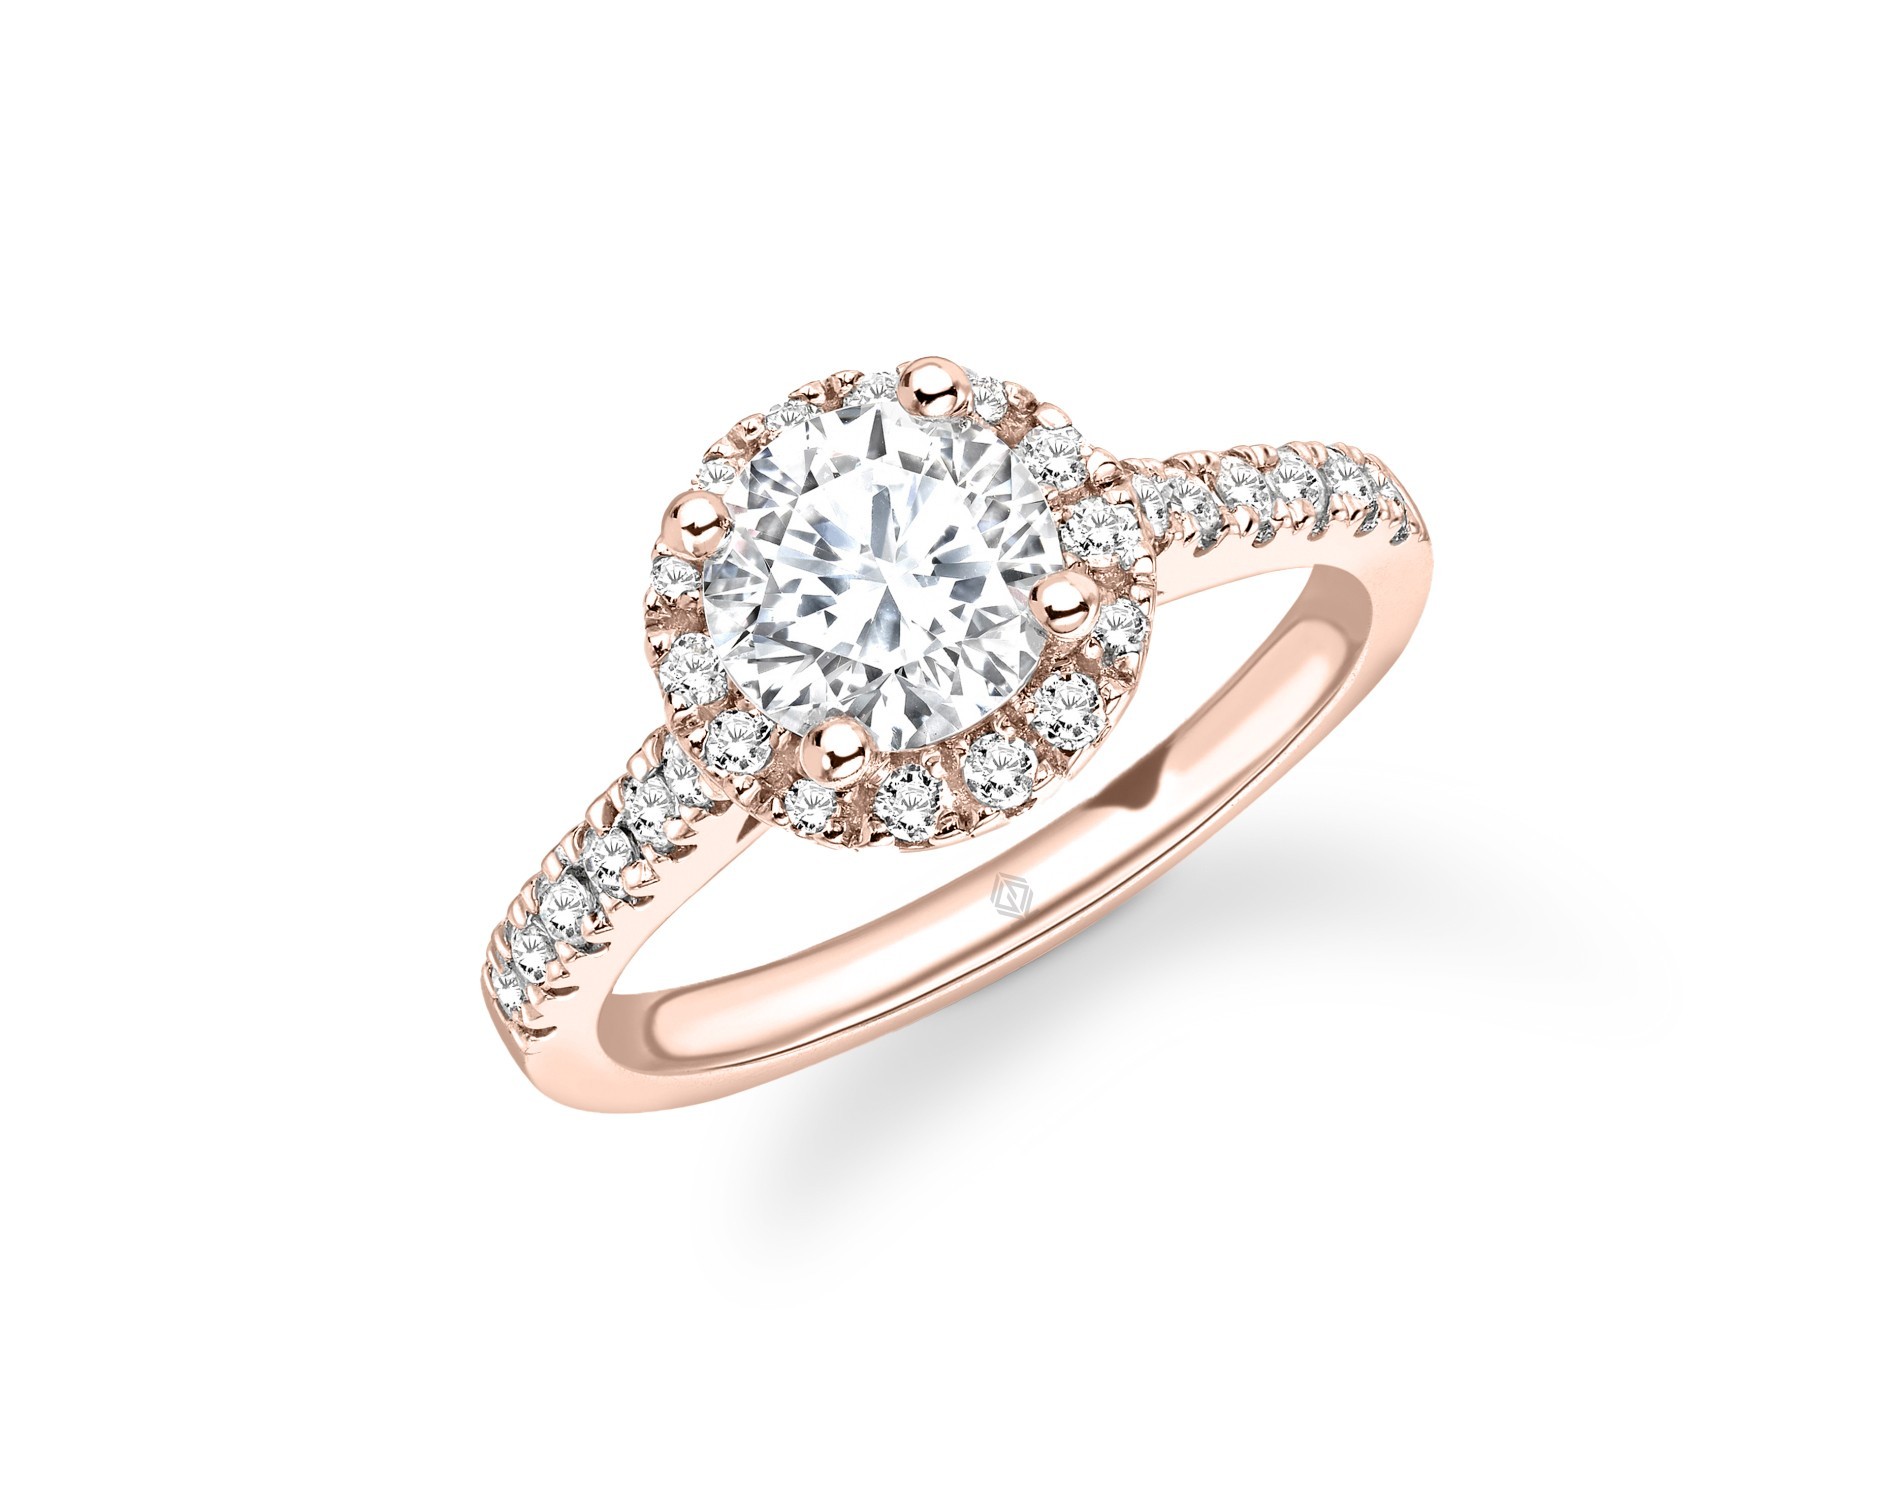 18K ROSE GOLD HALO ROUND CUT DIAMOND ENGAGEMENT RING WITH SIDE STONES PAVE SET